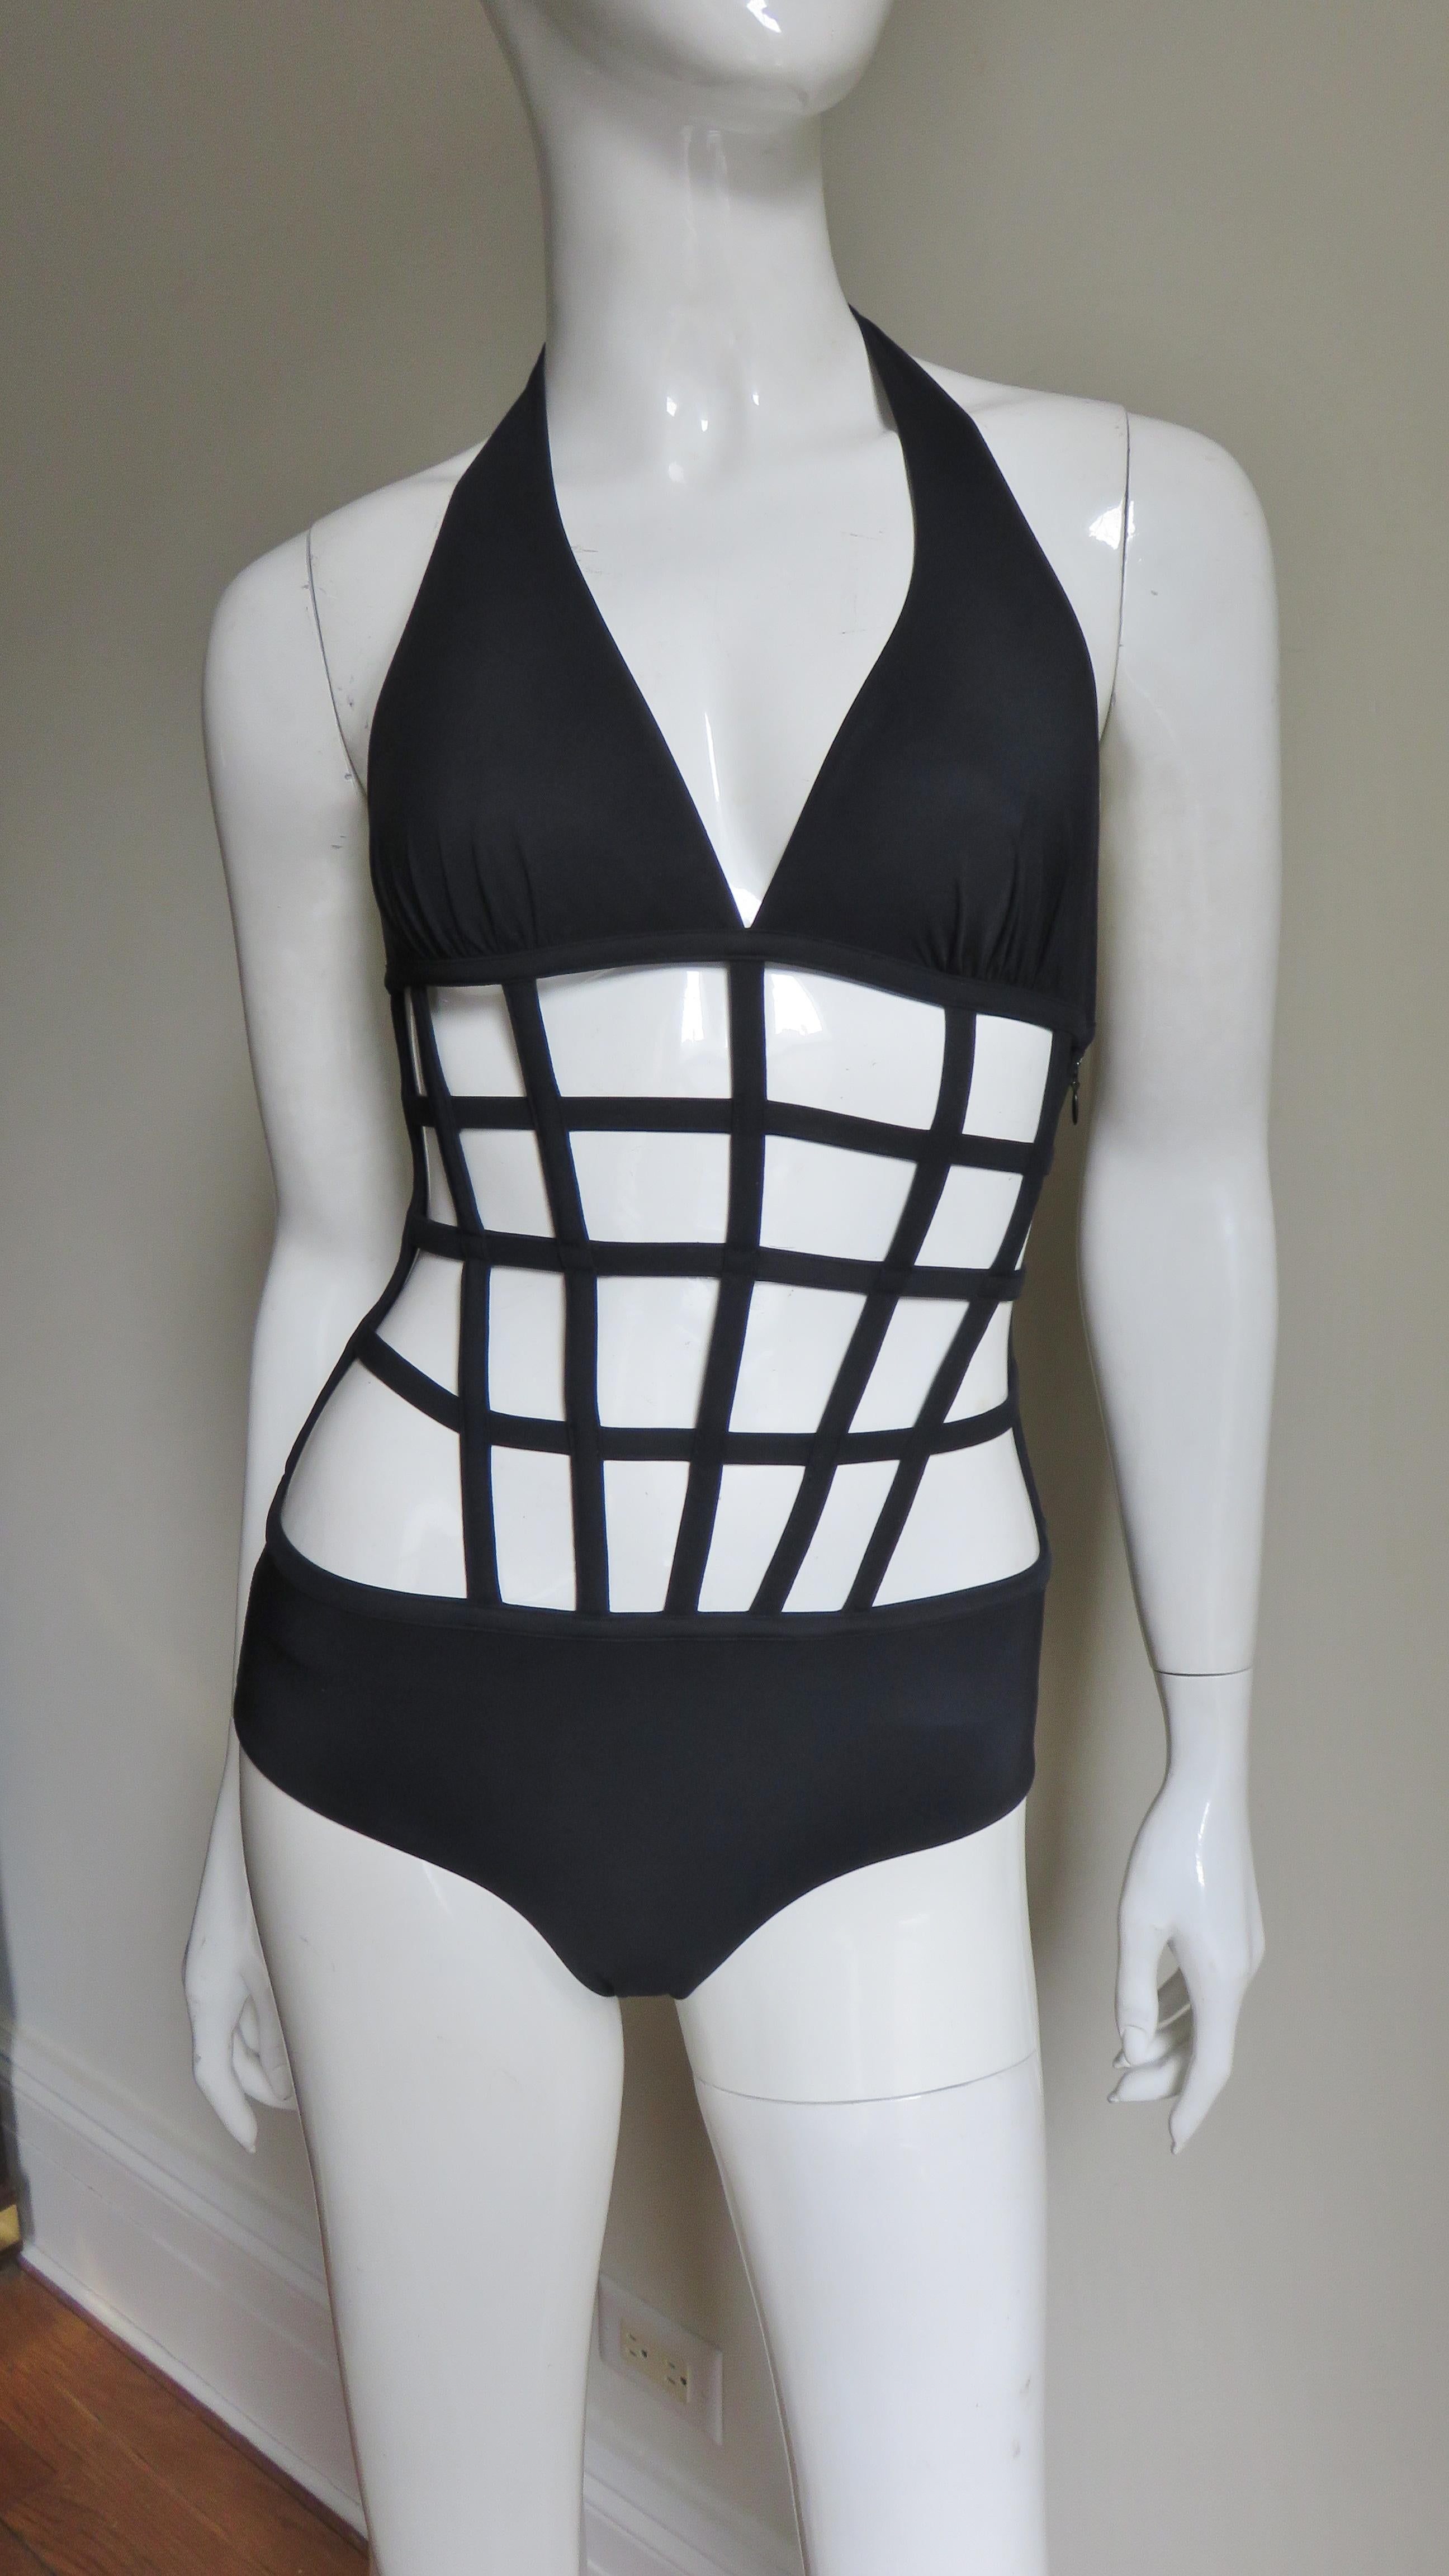 A great black swimsuit from Jean Paul Gaultier for La Perla. It has a halter style top and a bikini bottom joined together with boned strips both horizontal and vertical creating a geometric effect.  There is a side invisible zipper and a ties at